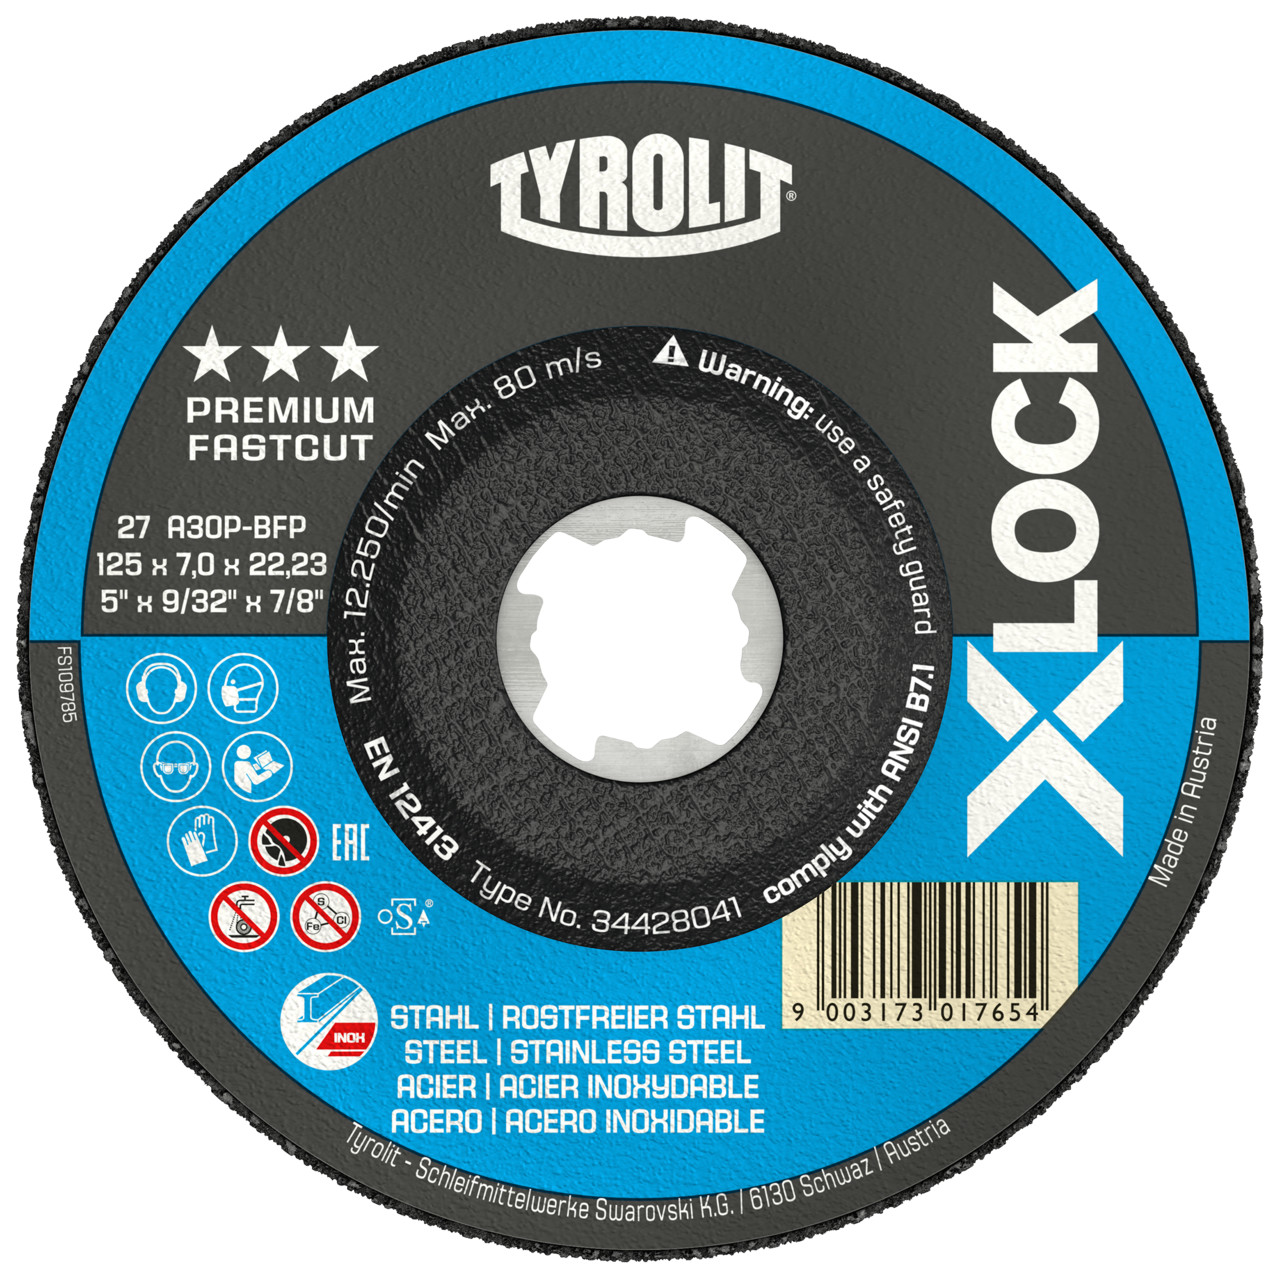 TYROLIT grinding wheel DxUxH 115x7x22.23 X-LOCK for steel and stainless steel